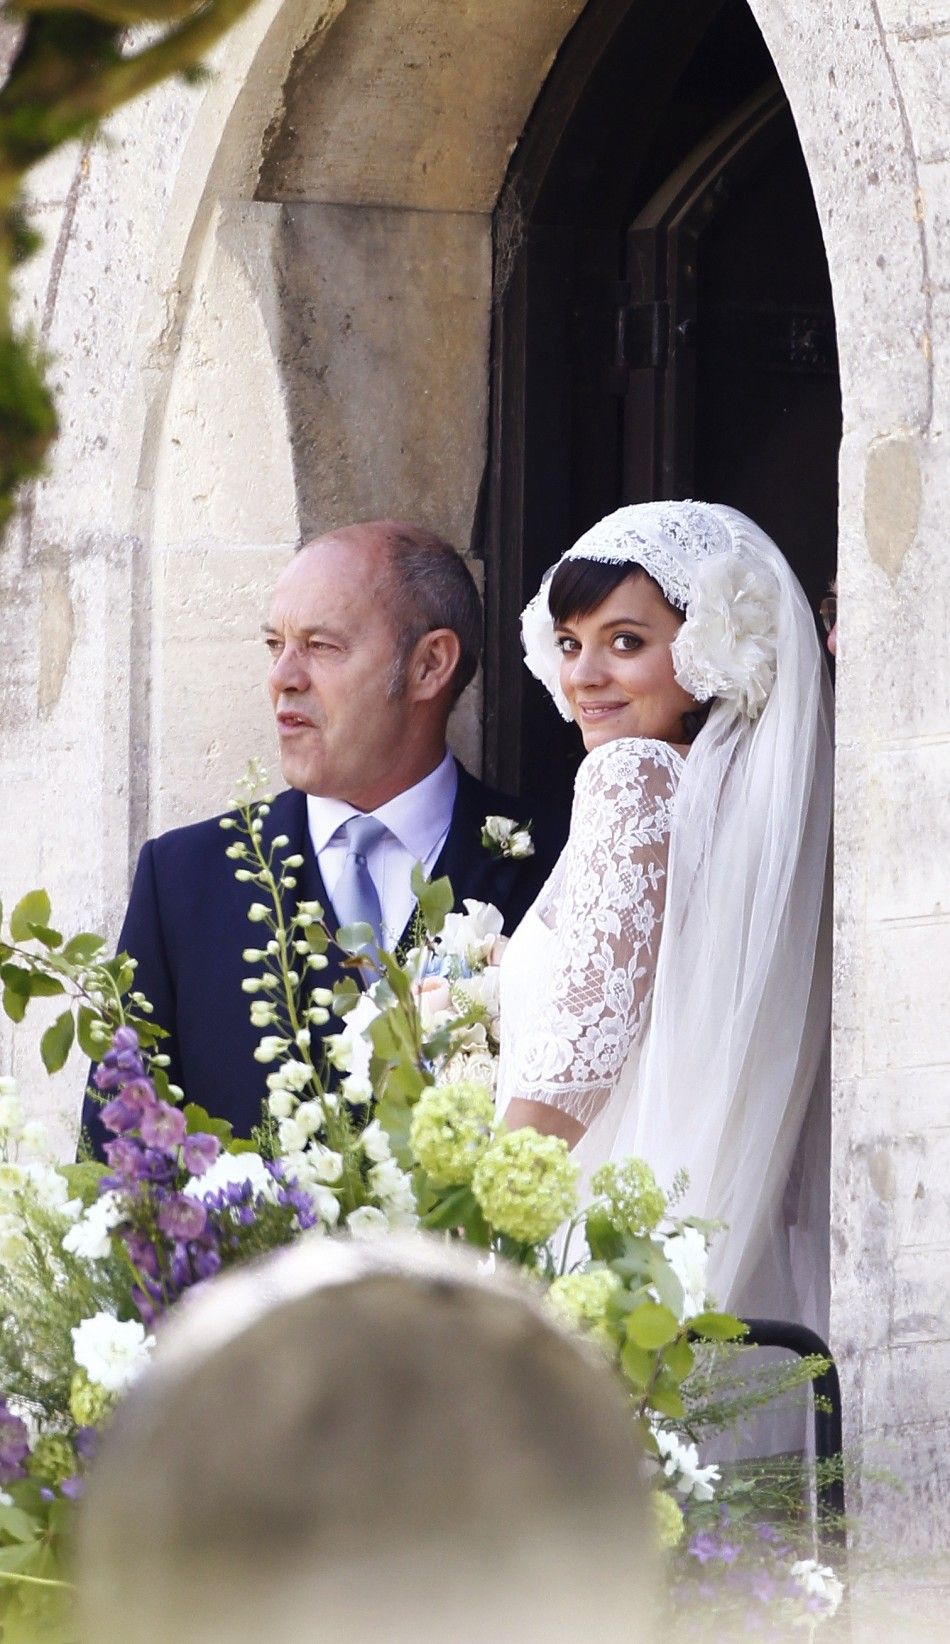 British Singer Lily Allen waits with her father Keith to walk down the aisle during her wedding to Sam Cooper at St James the Great Church in Cranham, Gloucestershire, western England, June 11, 2011